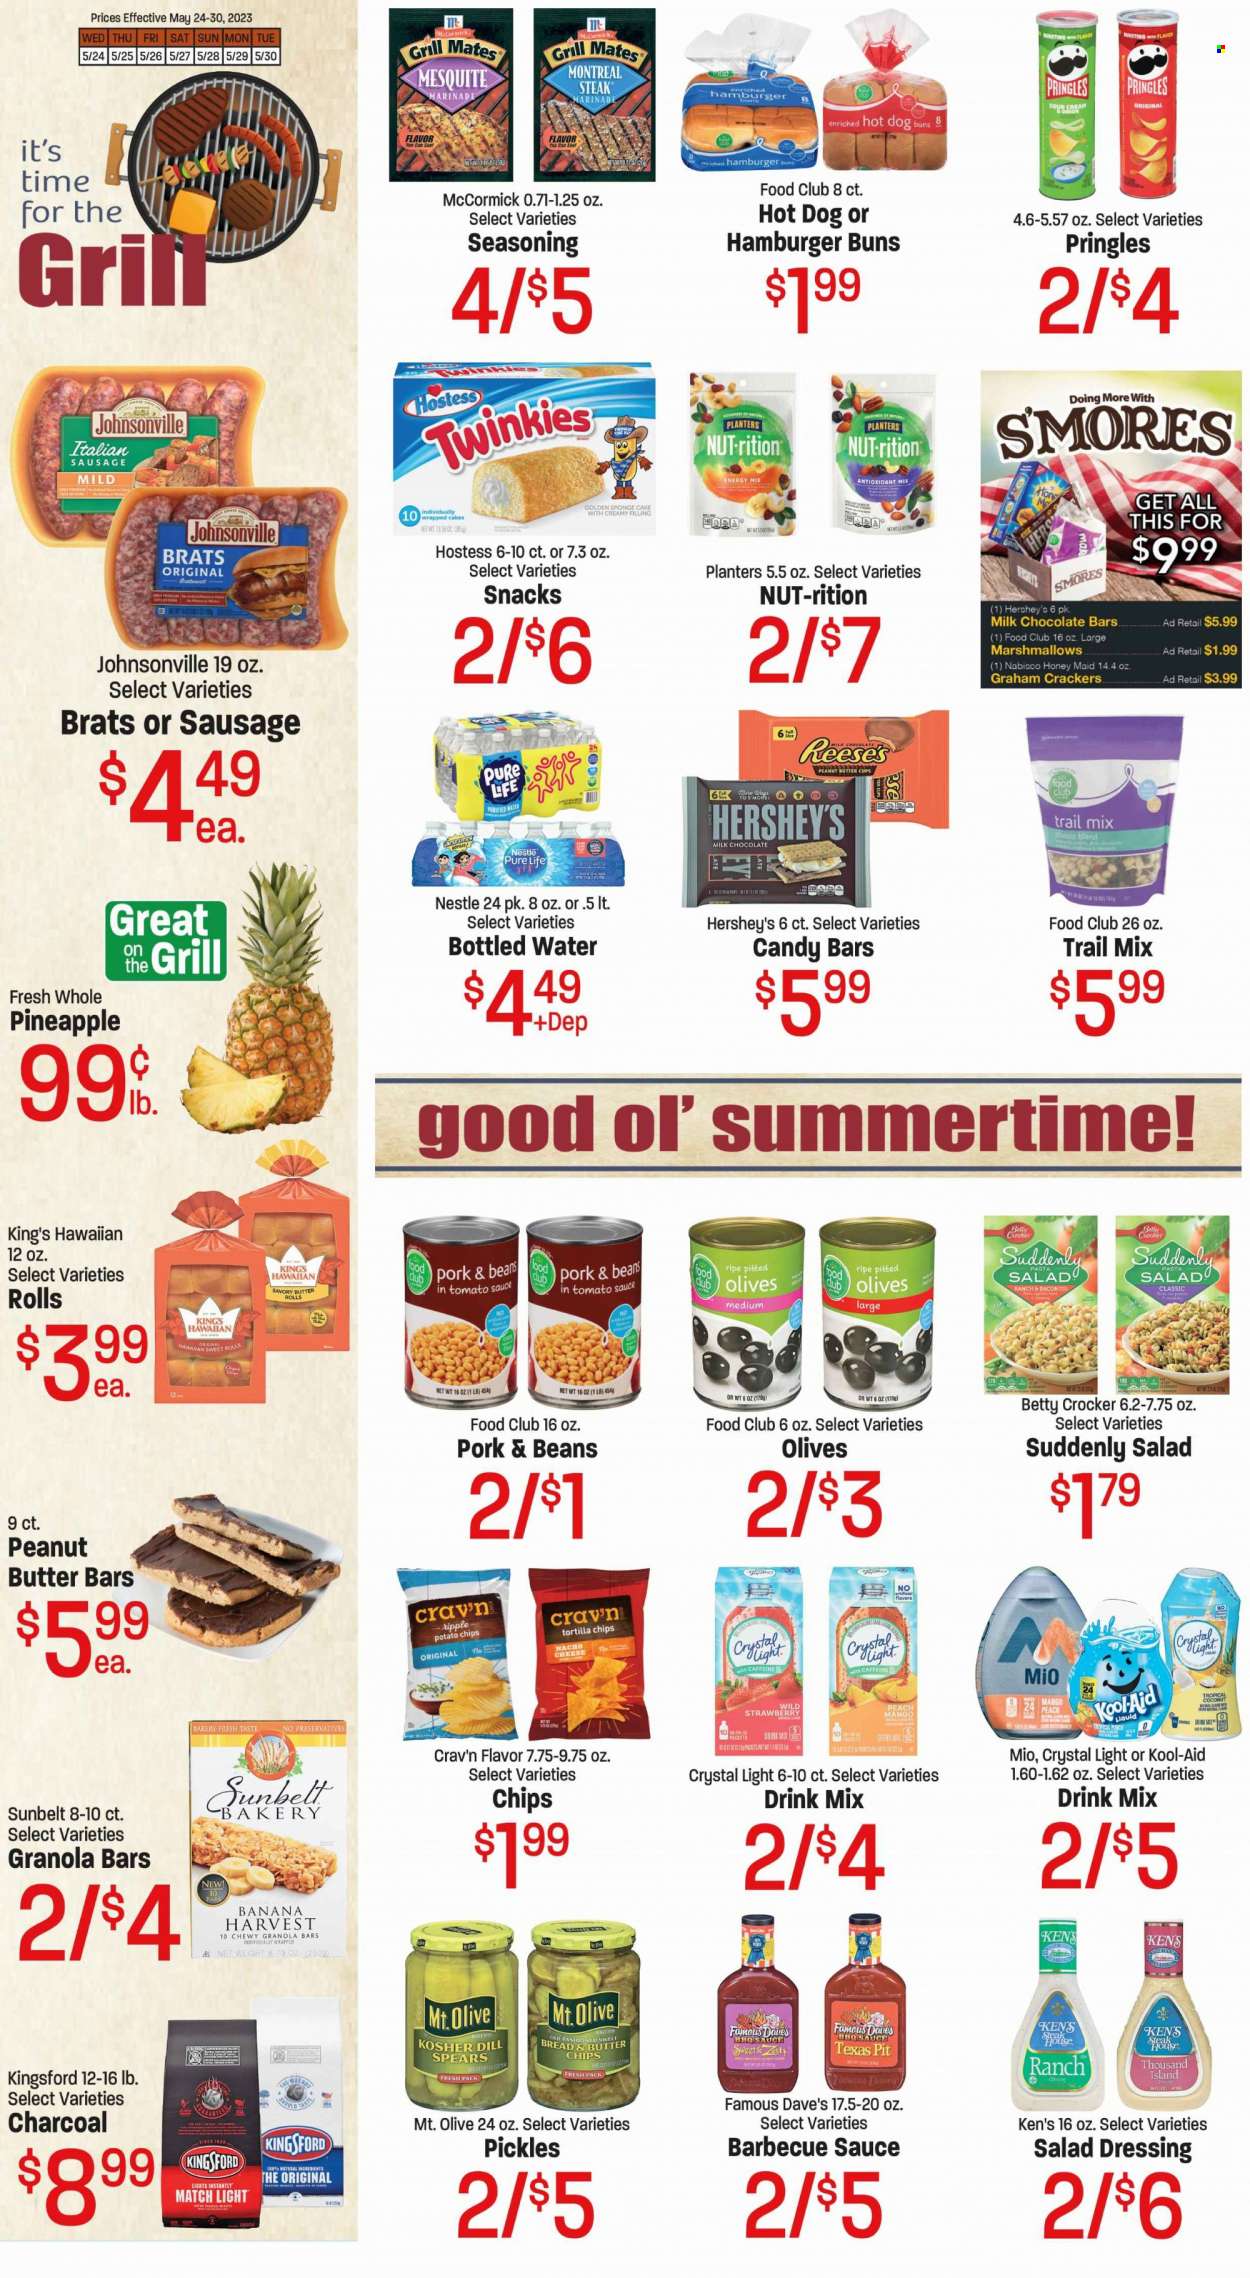 thumbnail - Red Apple Marketplace Flyer - 05/24/2023 - 05/30/2023 - Sales products - cake, buns, burger buns, sweet rolls, pineapple, coconut, hot dog, Kingsford, Johnsonville, bratwurst, sausage, italian sausage, sour cream, Thousand Island dressing, Reese's, Hershey's, graham crackers, marshmallows, milk chocolate, Nestlé, snack, crackers, peanut butter cups, chocolate bar, candy bar, Nabisco, tortilla chips, potato chips, Pringles, chips, pickles, olives, granola bar, Honey Maid, dill, spice, BBQ sauce, salad dressing, dressing, marinade, Planters, trail mix, bottled water, purified water, water, steak. Page 5.